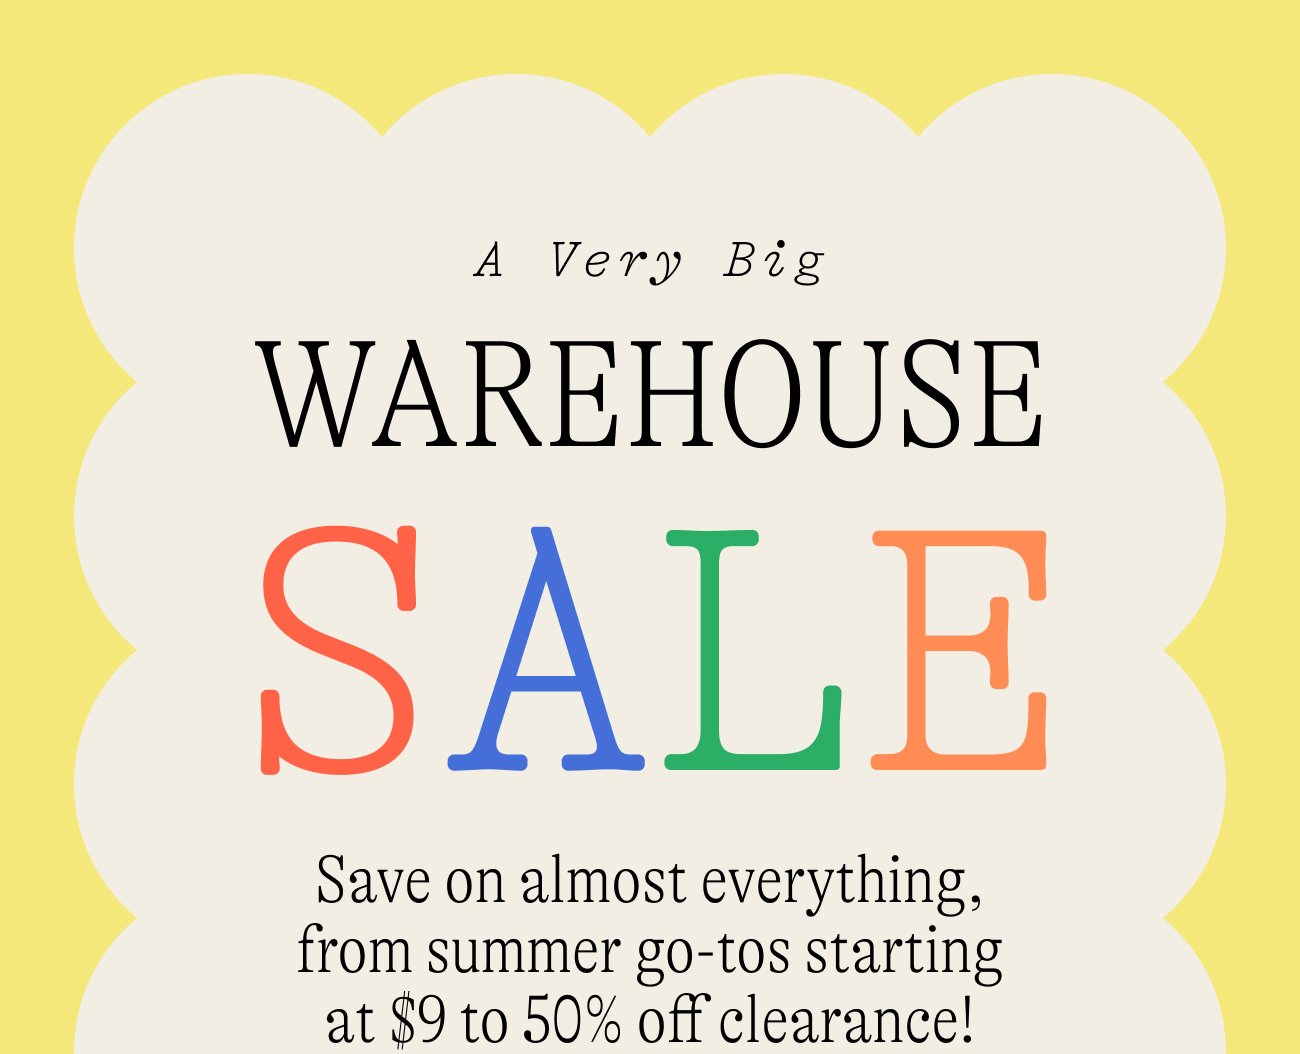 A very big WAREHOUSE sale. Tomorrow’s the last day to save on must-have summer styles, including 50% off ALL clearance!